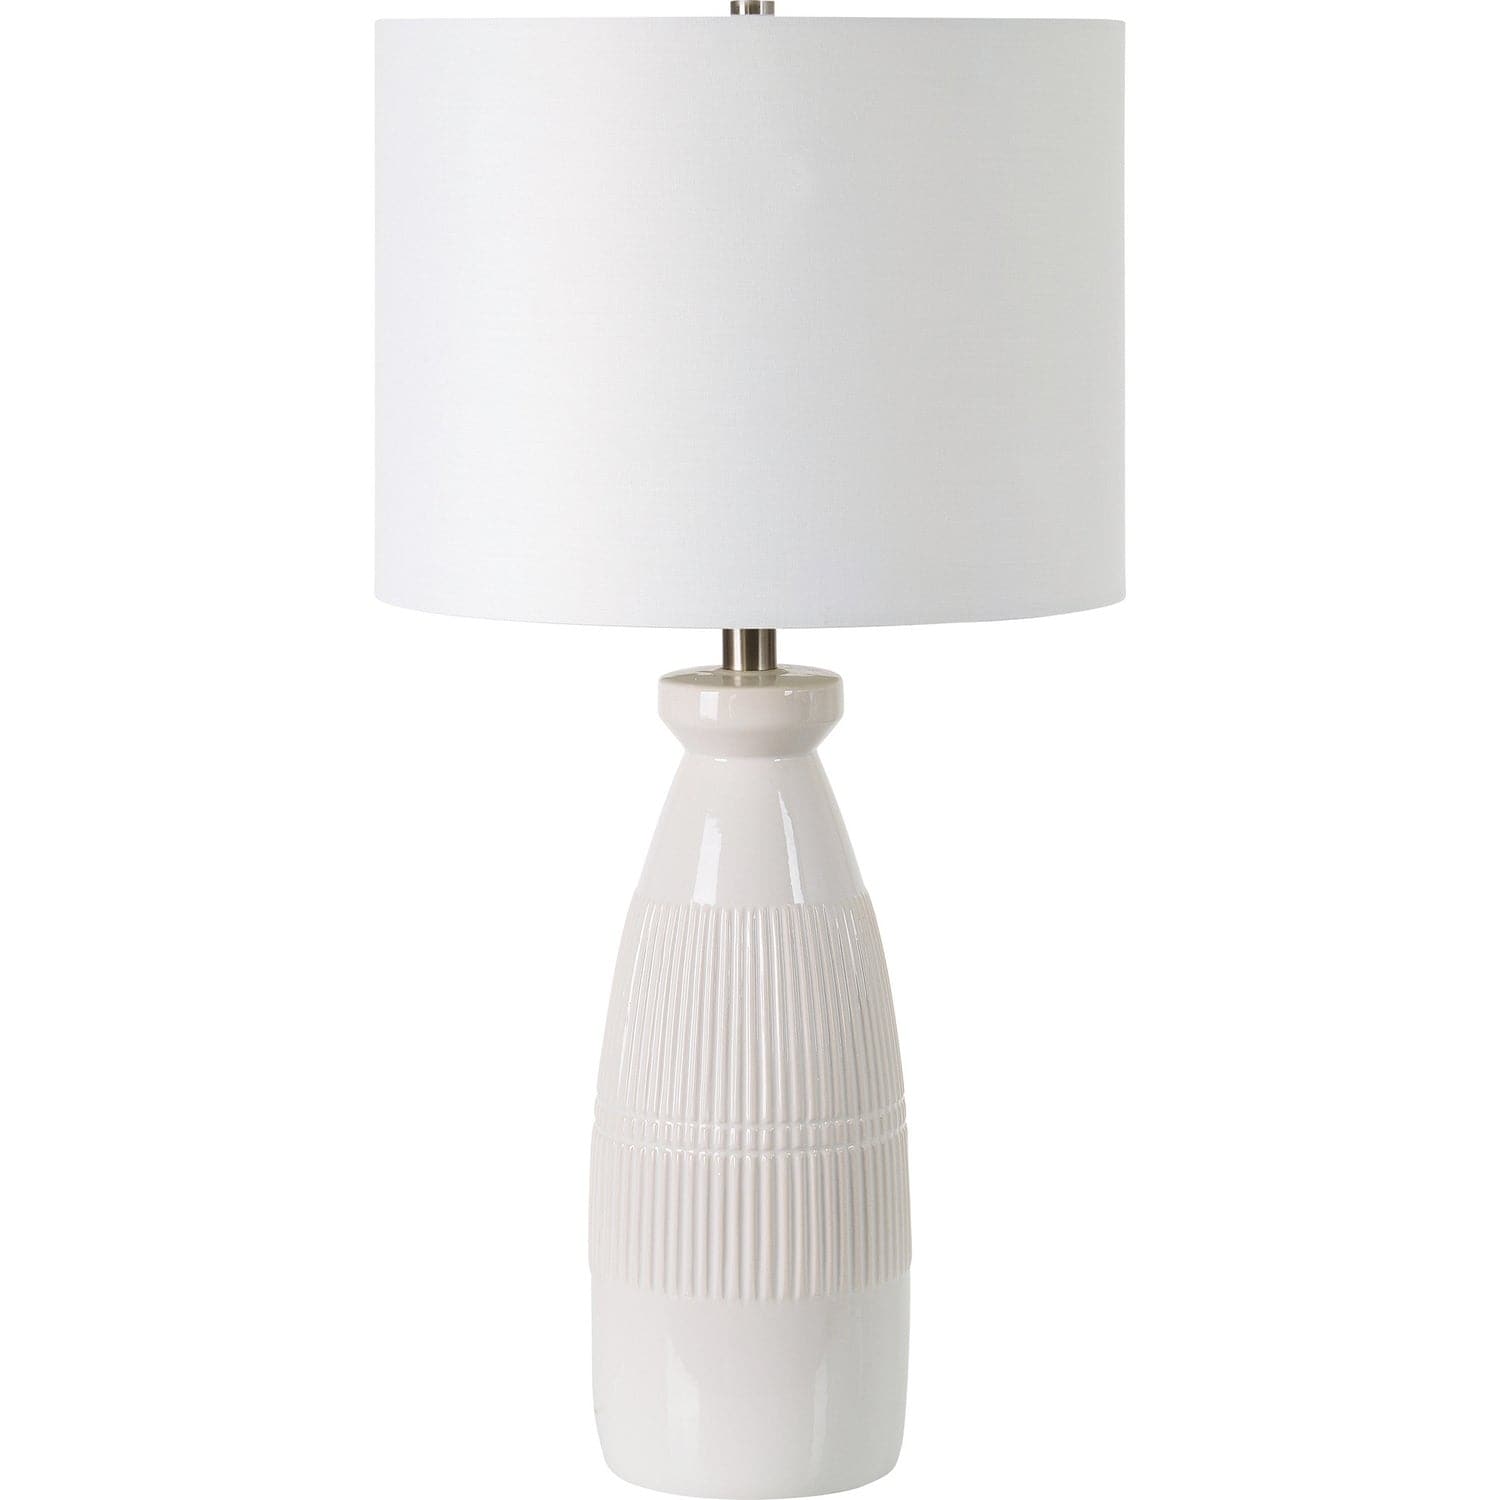 Renwil - LPT1233 - One Light Table Lamp - Nado - Off-White